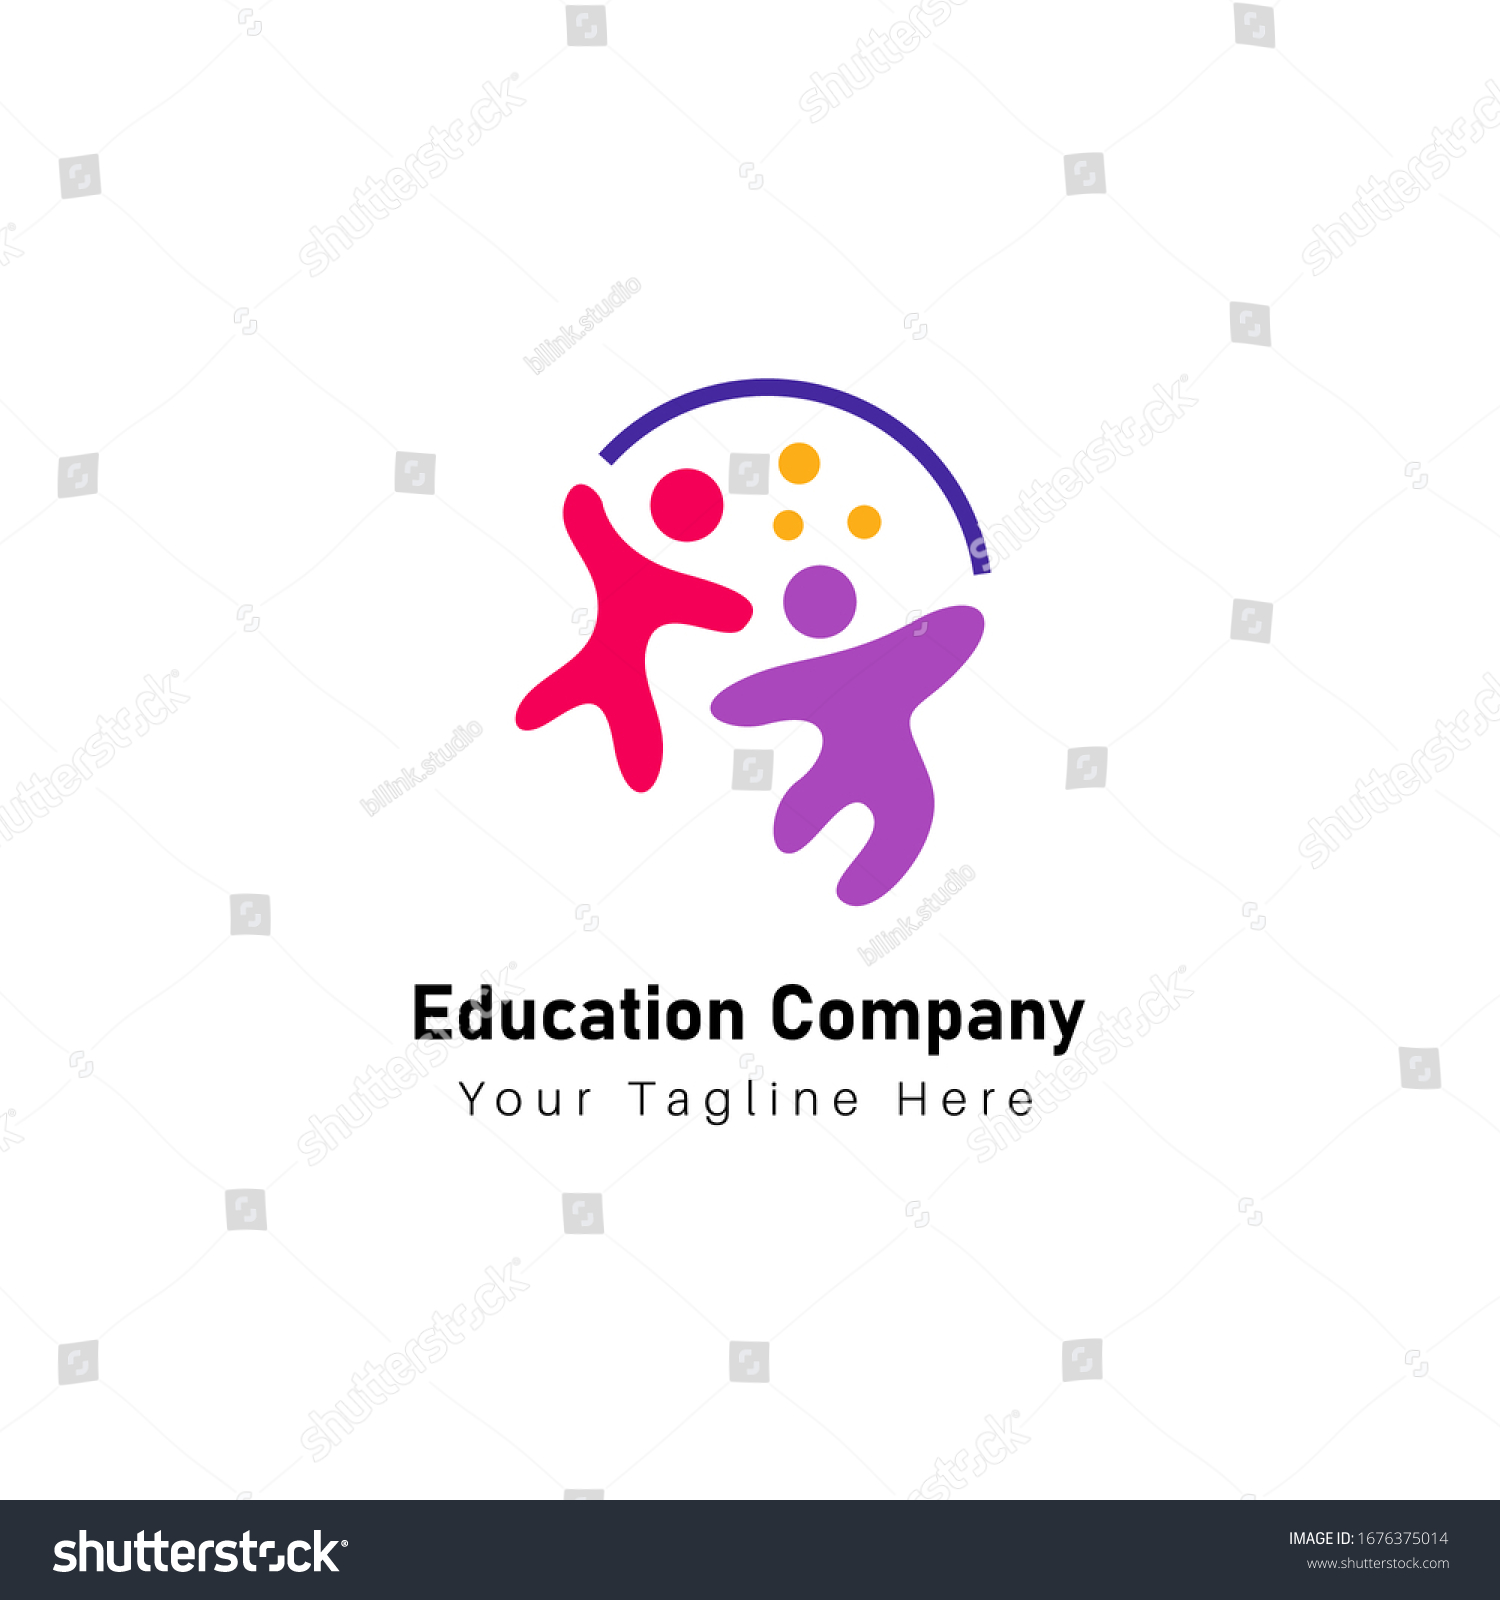 Youth Education Template Logo Library School Stock Vector (Royalty Free ...